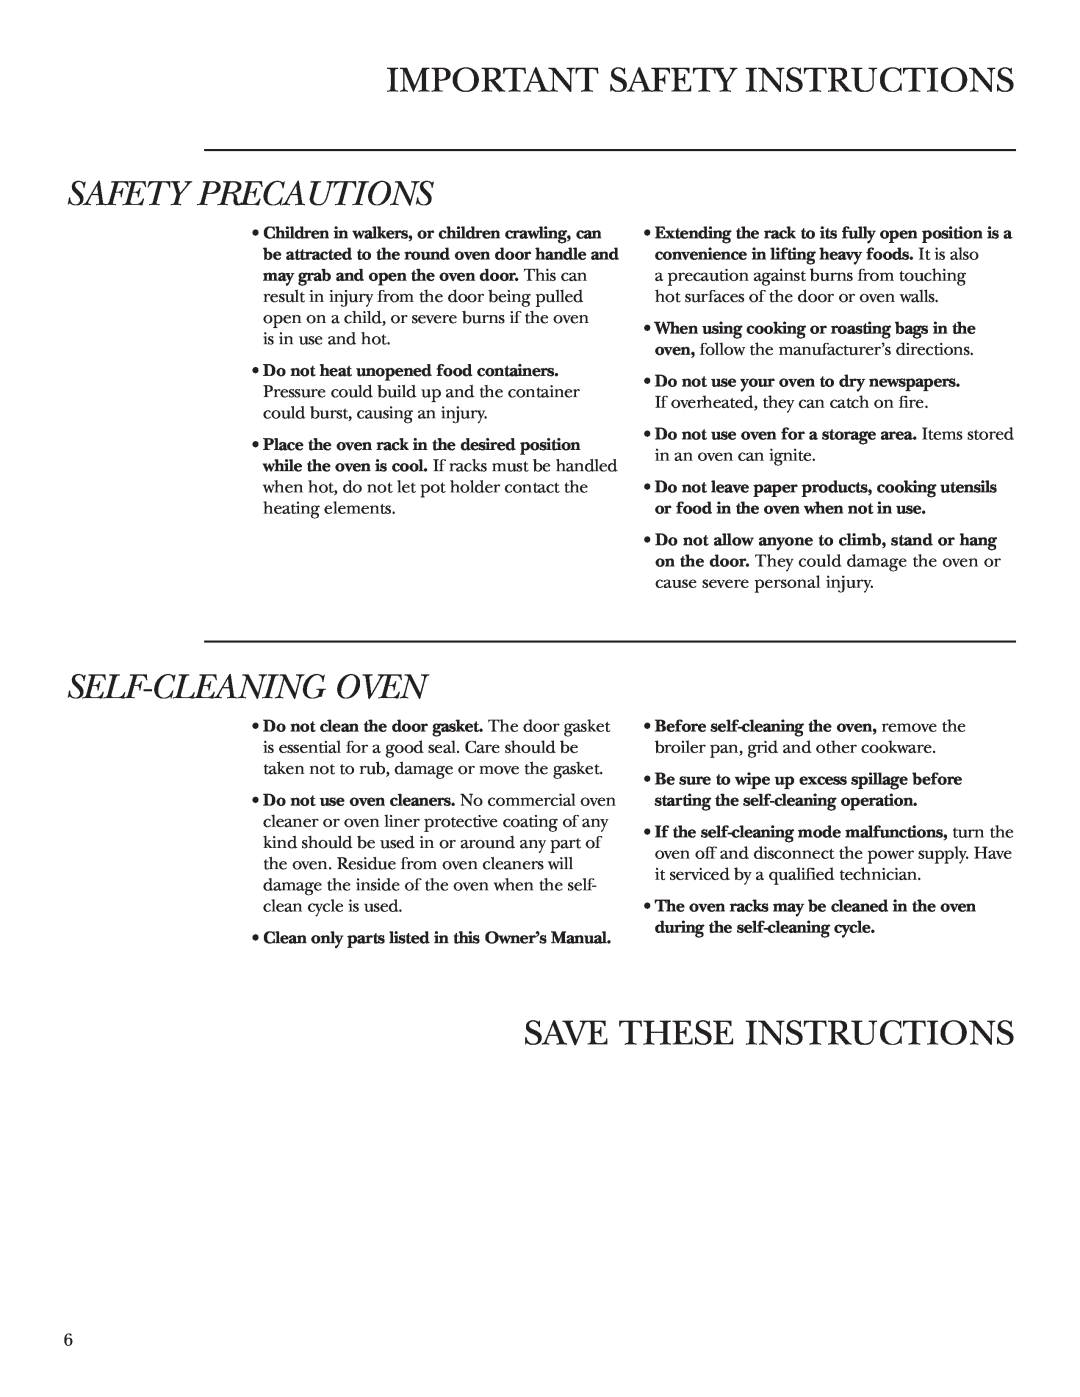 GE ZET2P, ZET2S, ZET1S, ZET1P Self-Cleaning Oven, Save These Instructions, Important Safety Instructions, Safety Precautions 